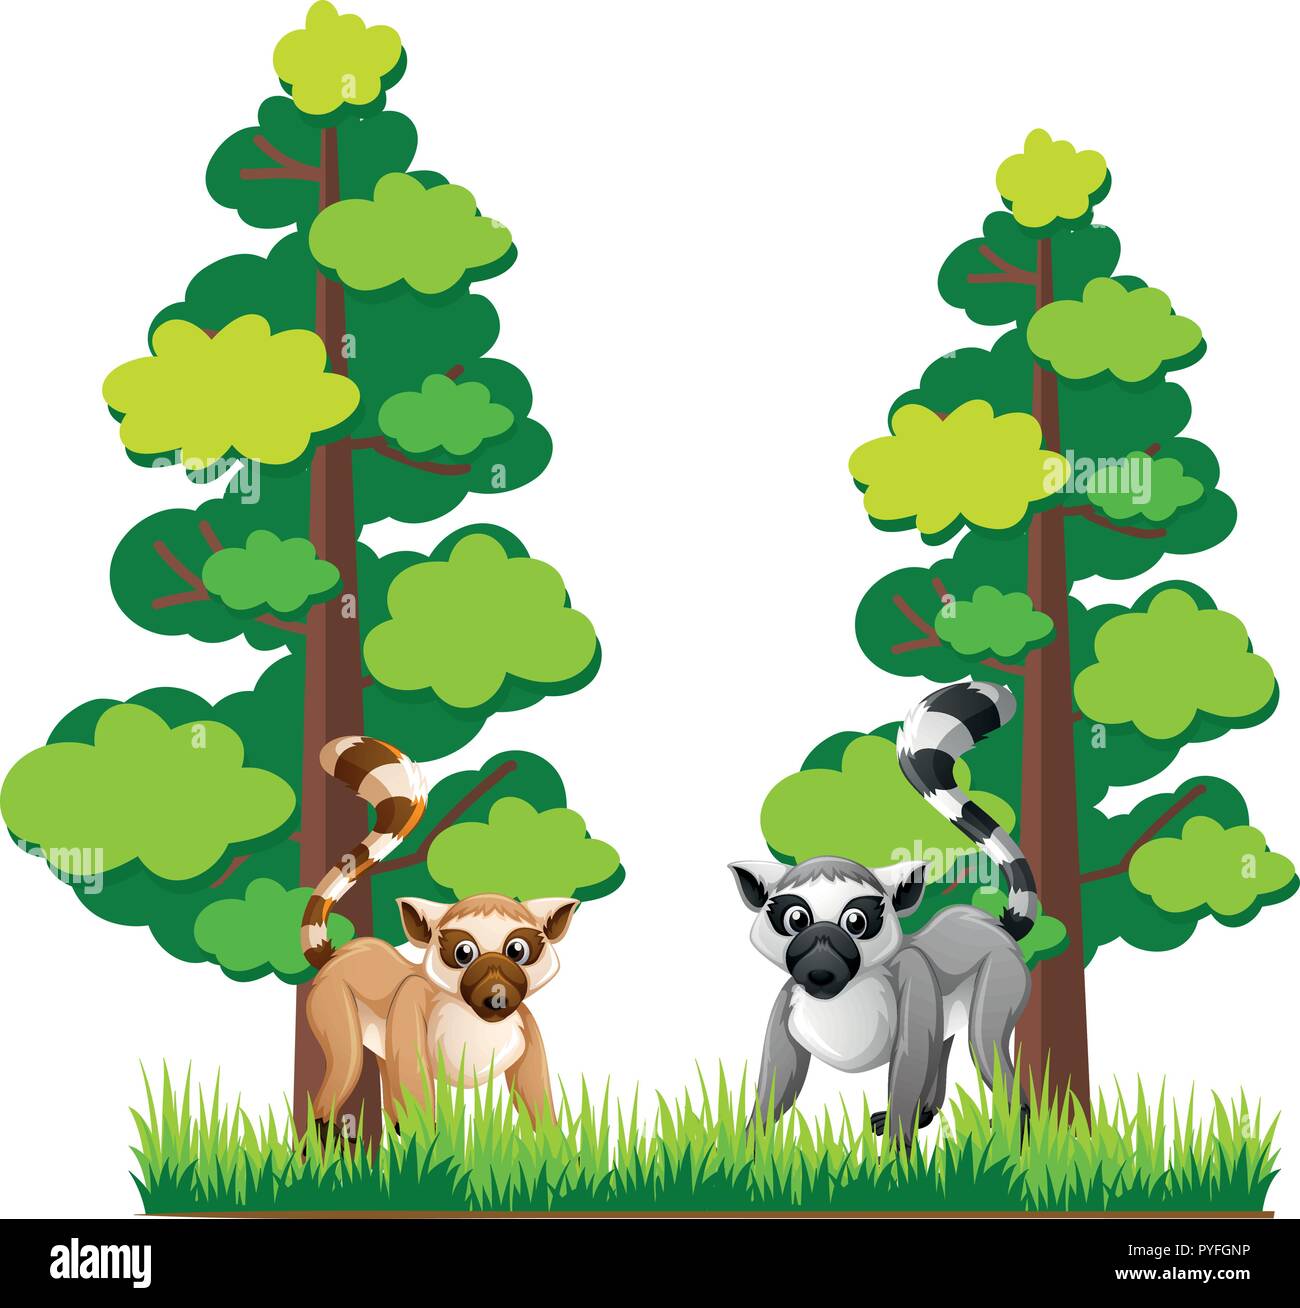 Two lemures in forest illustration Stock Vector